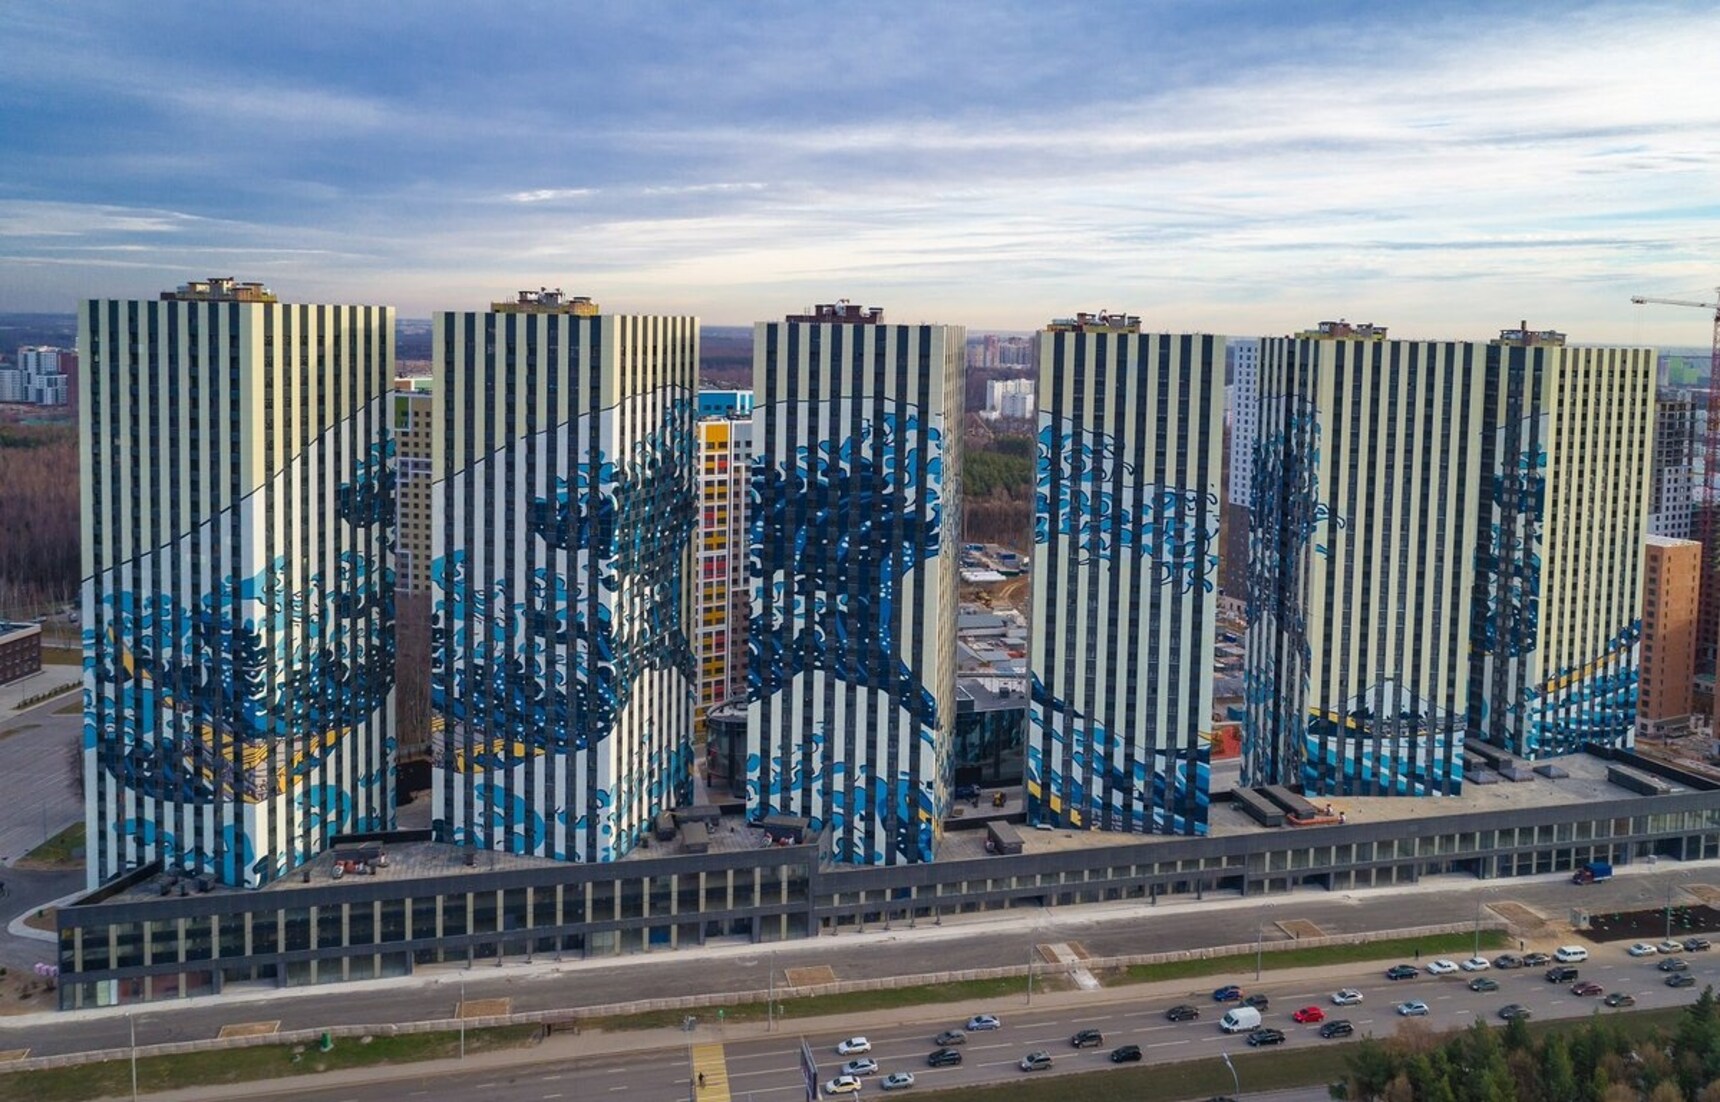 Hokusai's "Great Wave" Splashes in Moscow